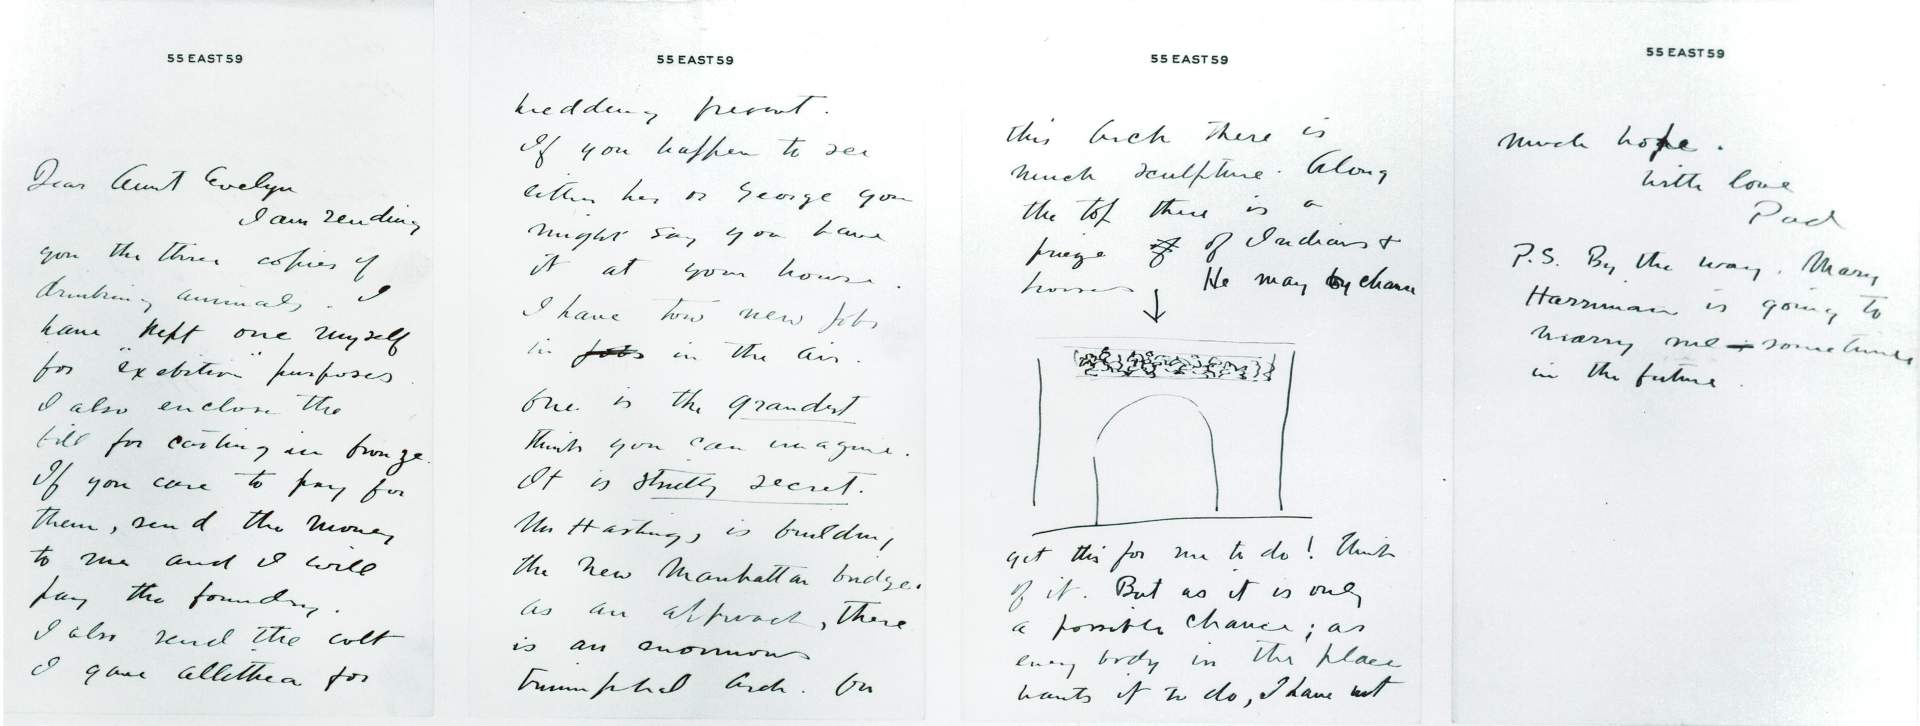 Letter from Charles Cary Rumsey ("Pad") to Evelyn Rumsey Cary, 1910